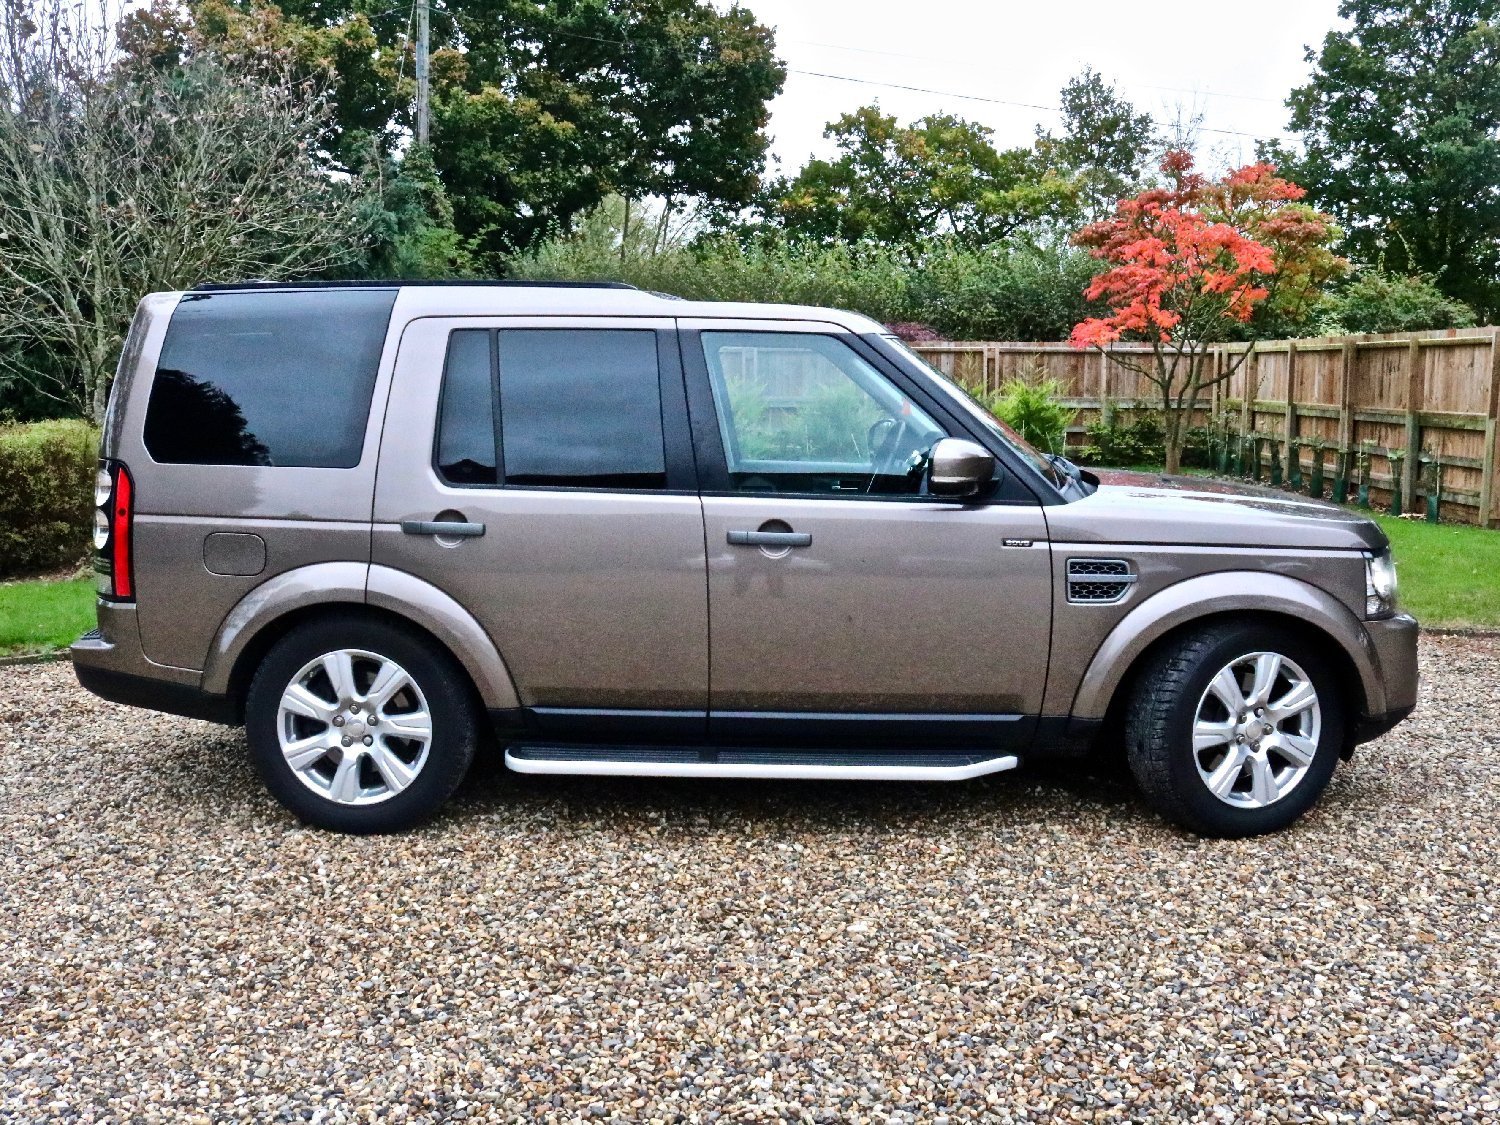 Used LAND ROVER DISCOVERY 4 in Sudbury, Suffolk